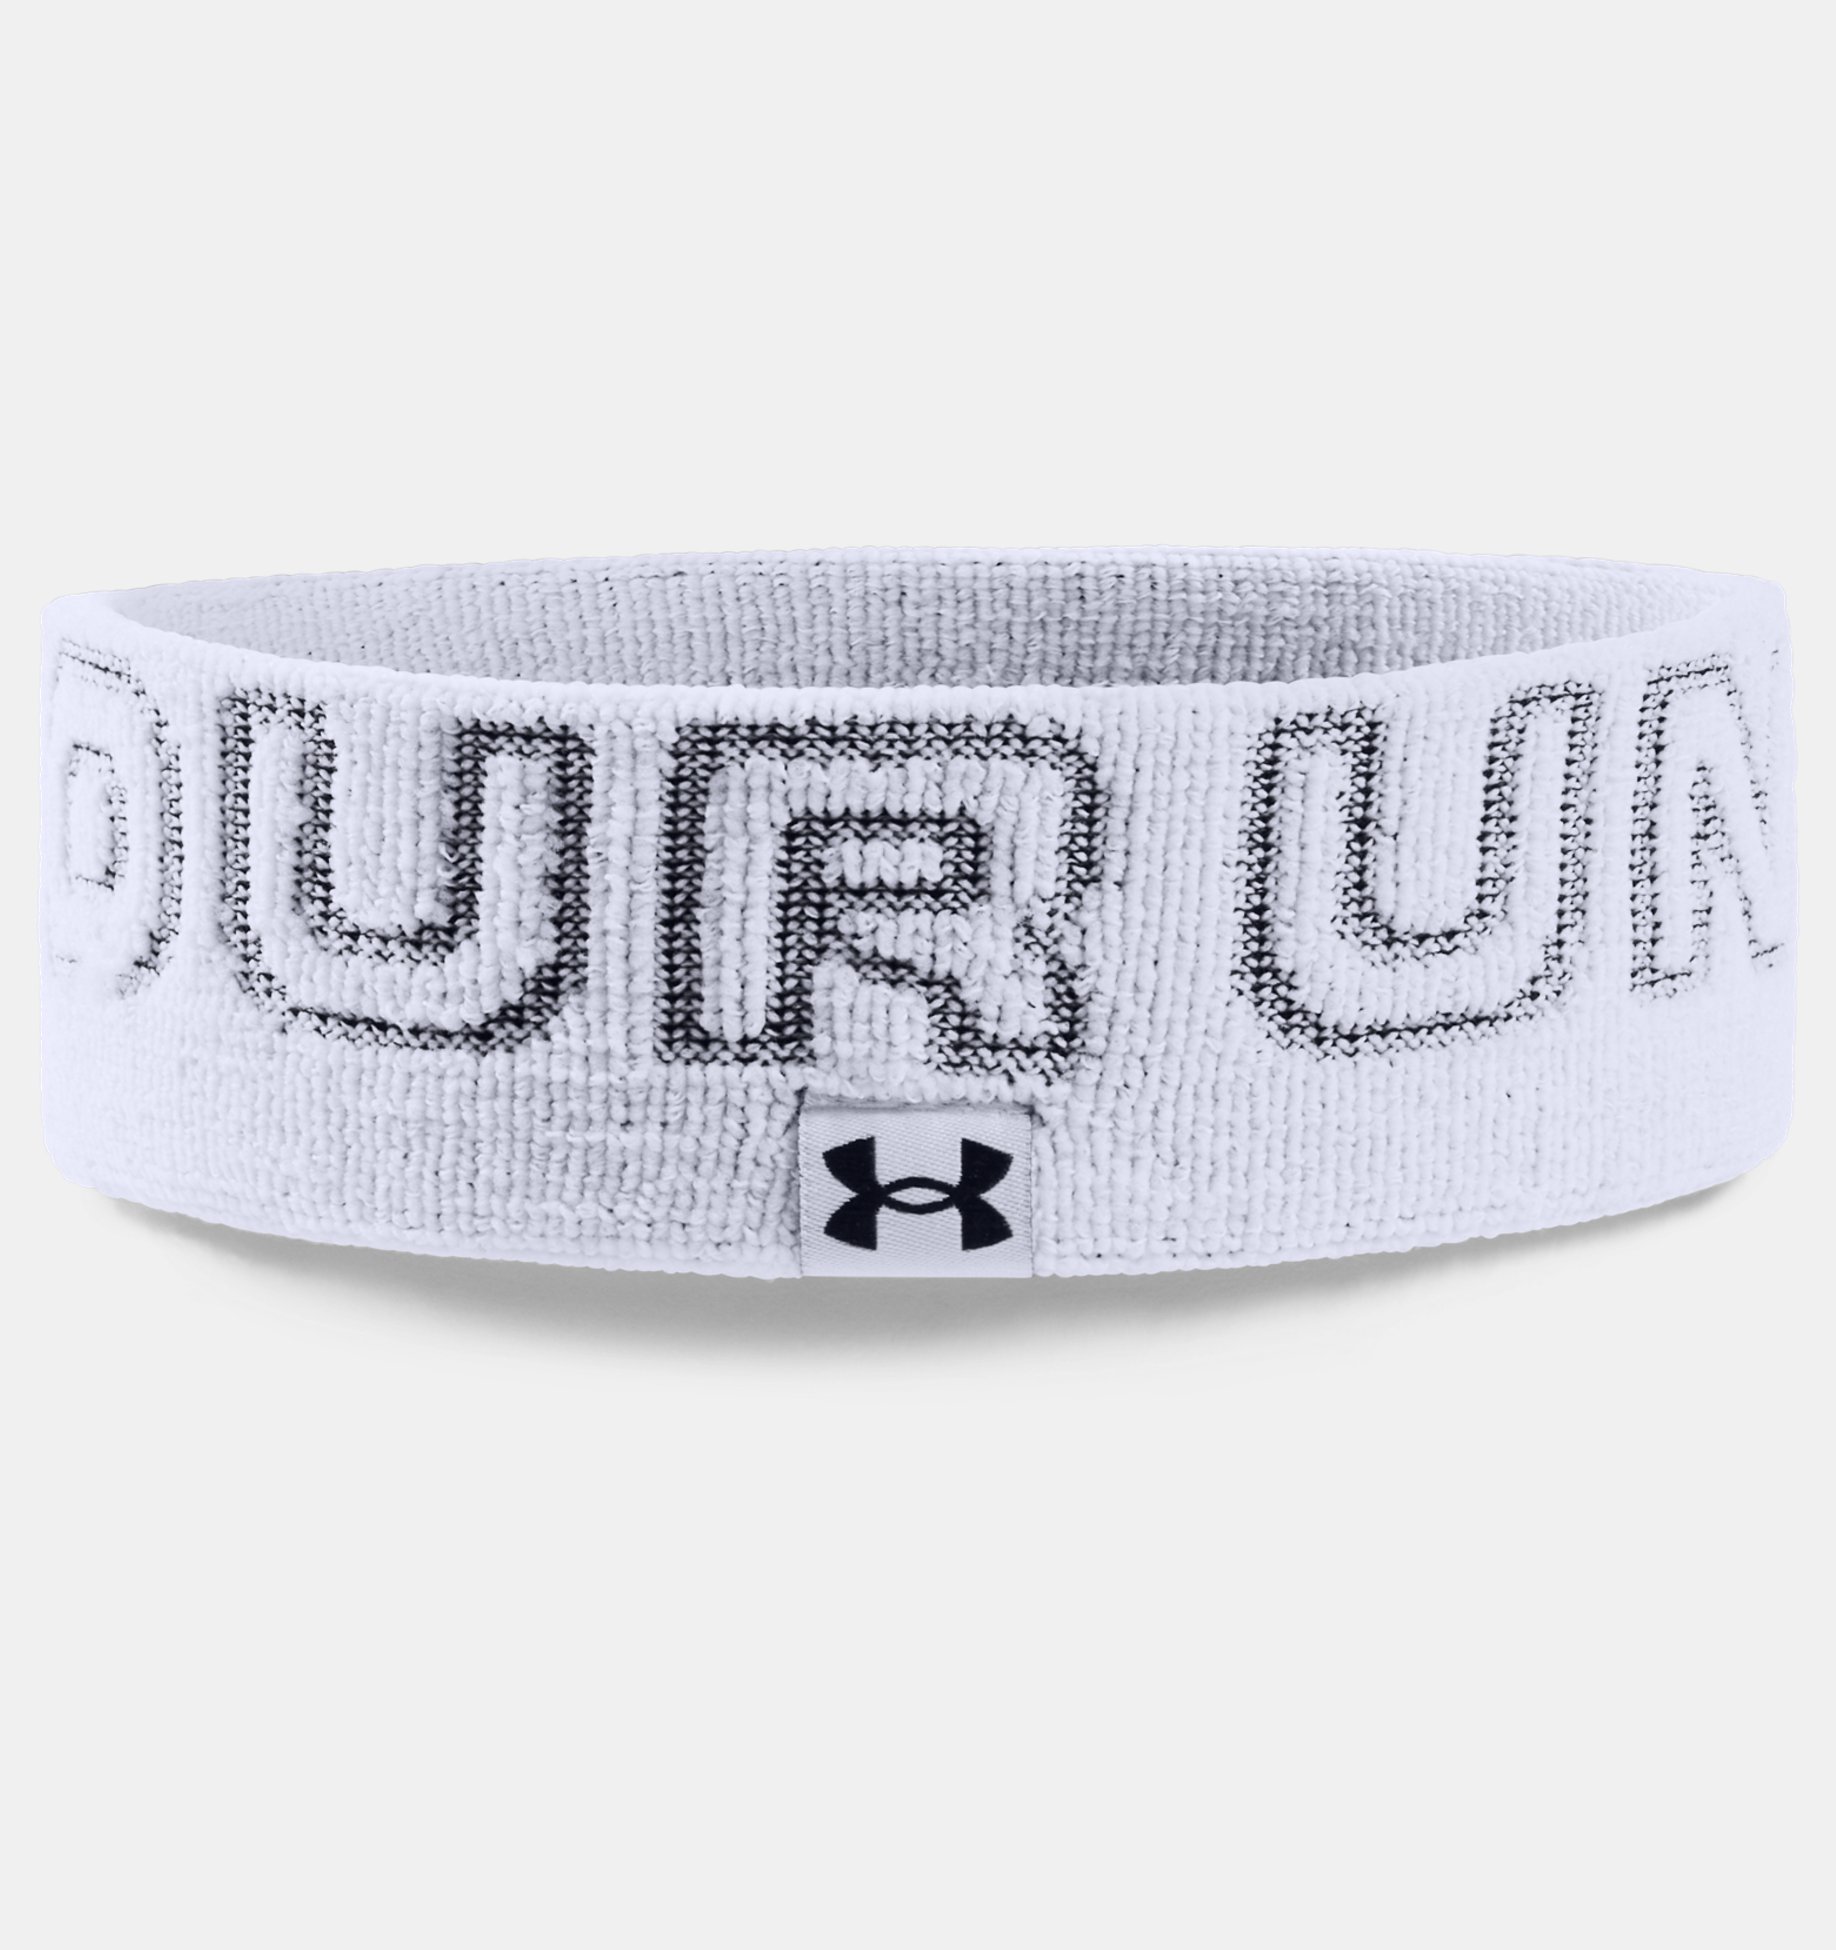 One Size Fits All /Black 001 Under Armour Adult Wordmark Terry Headband Black 